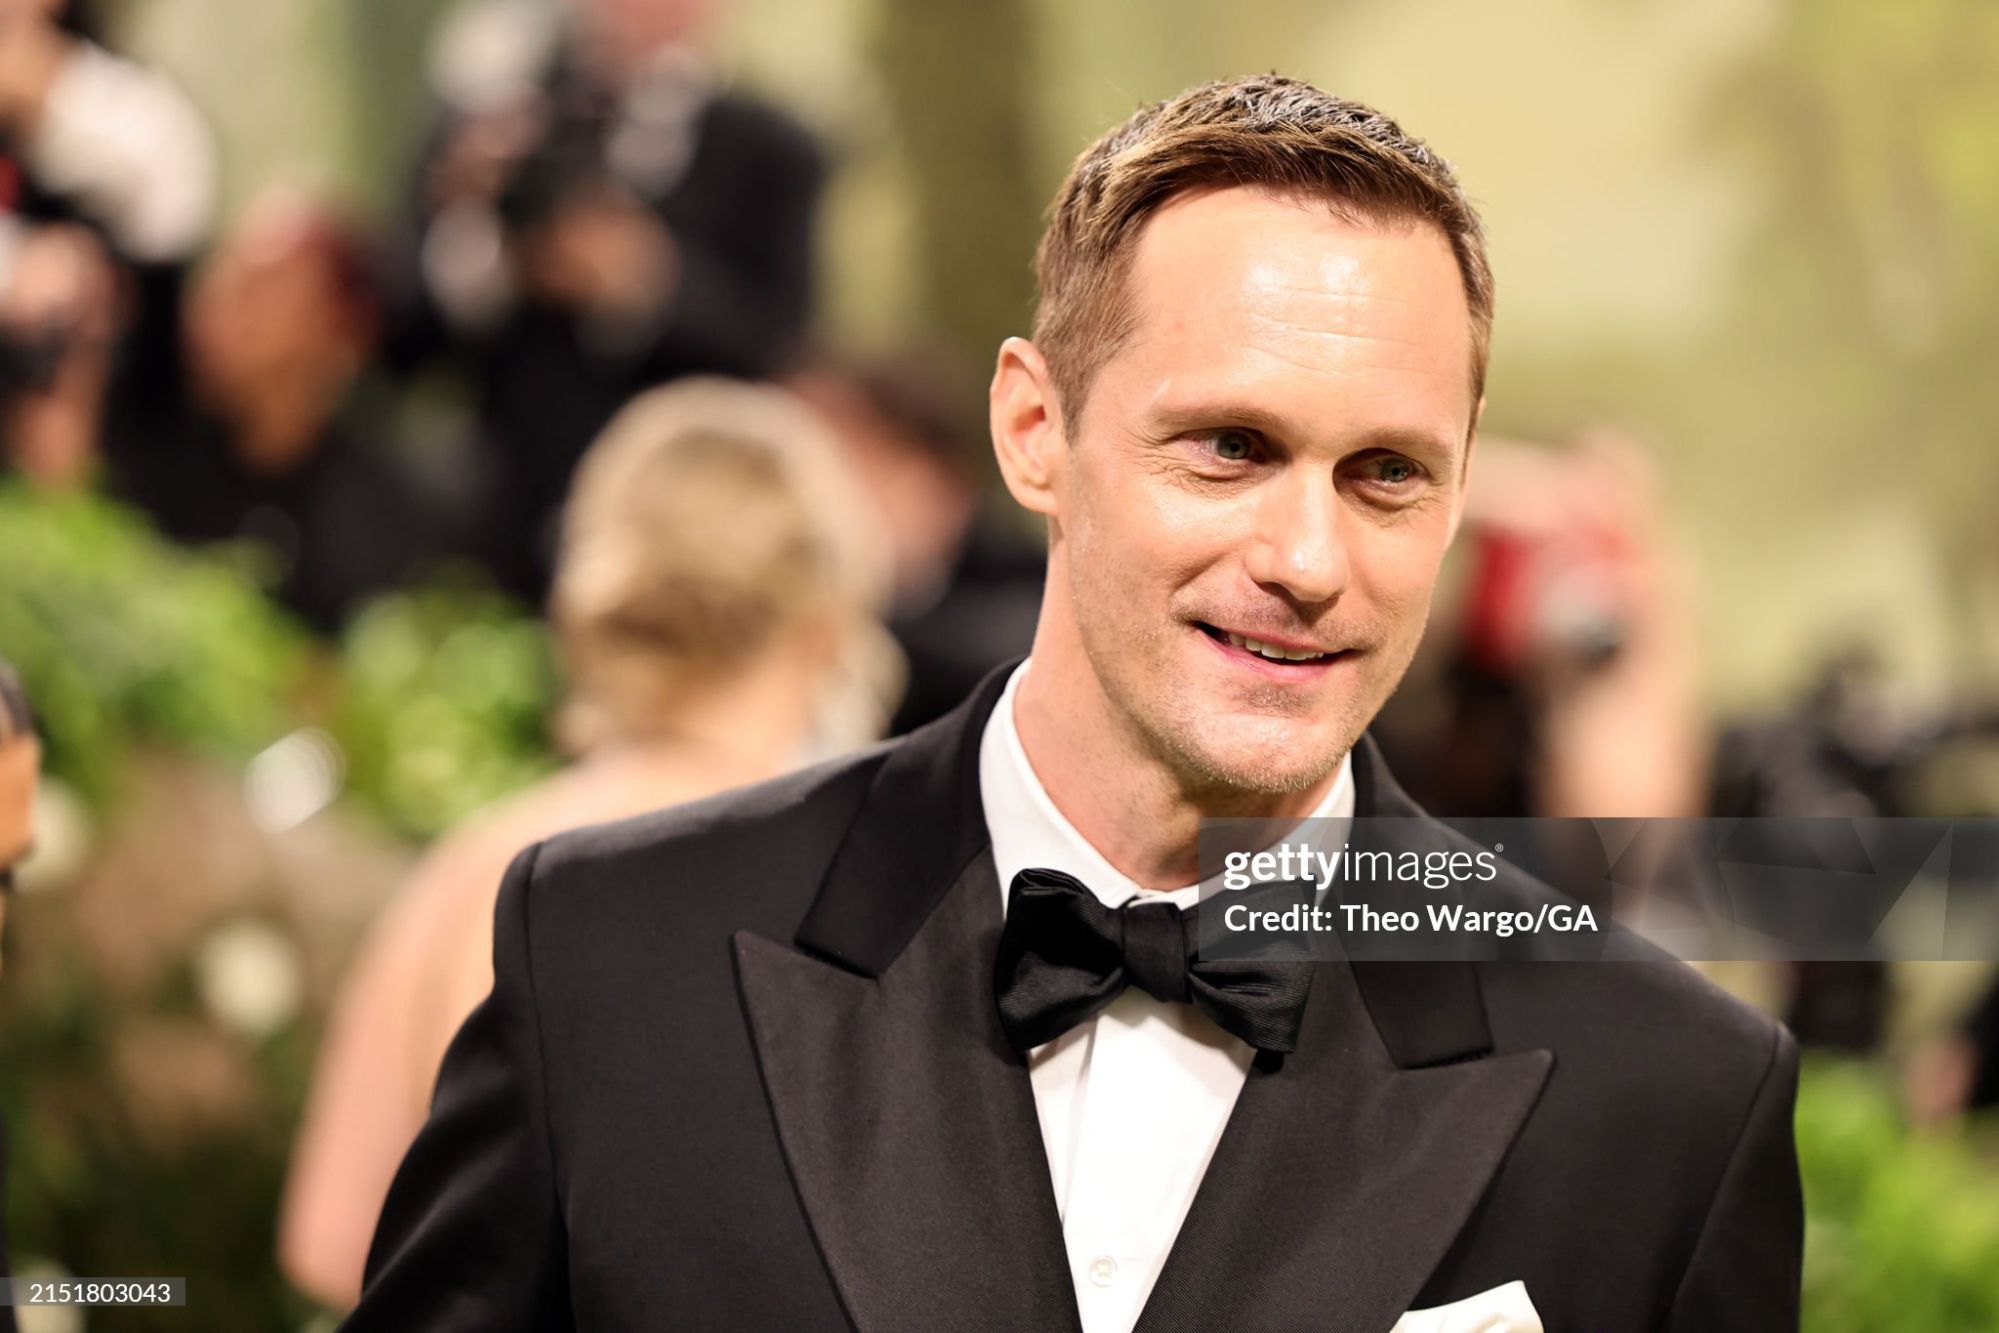 gettyimages-2151803043-2048x2048.jpg